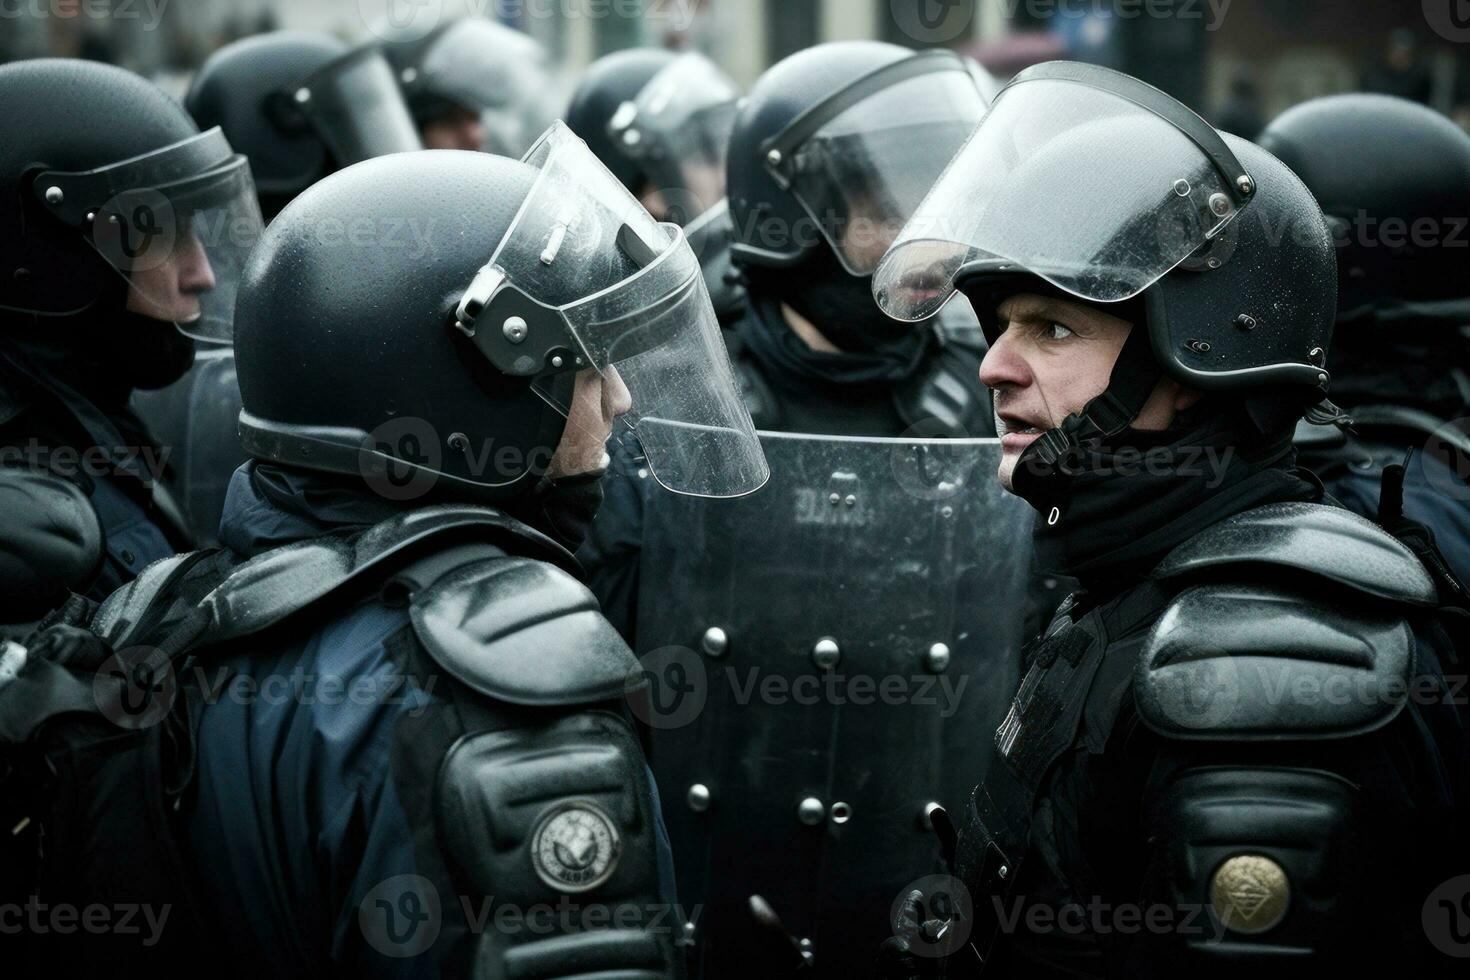 police in full gear on the street. police in helmets, helmets and bulletproof vests fight protests and riots photo